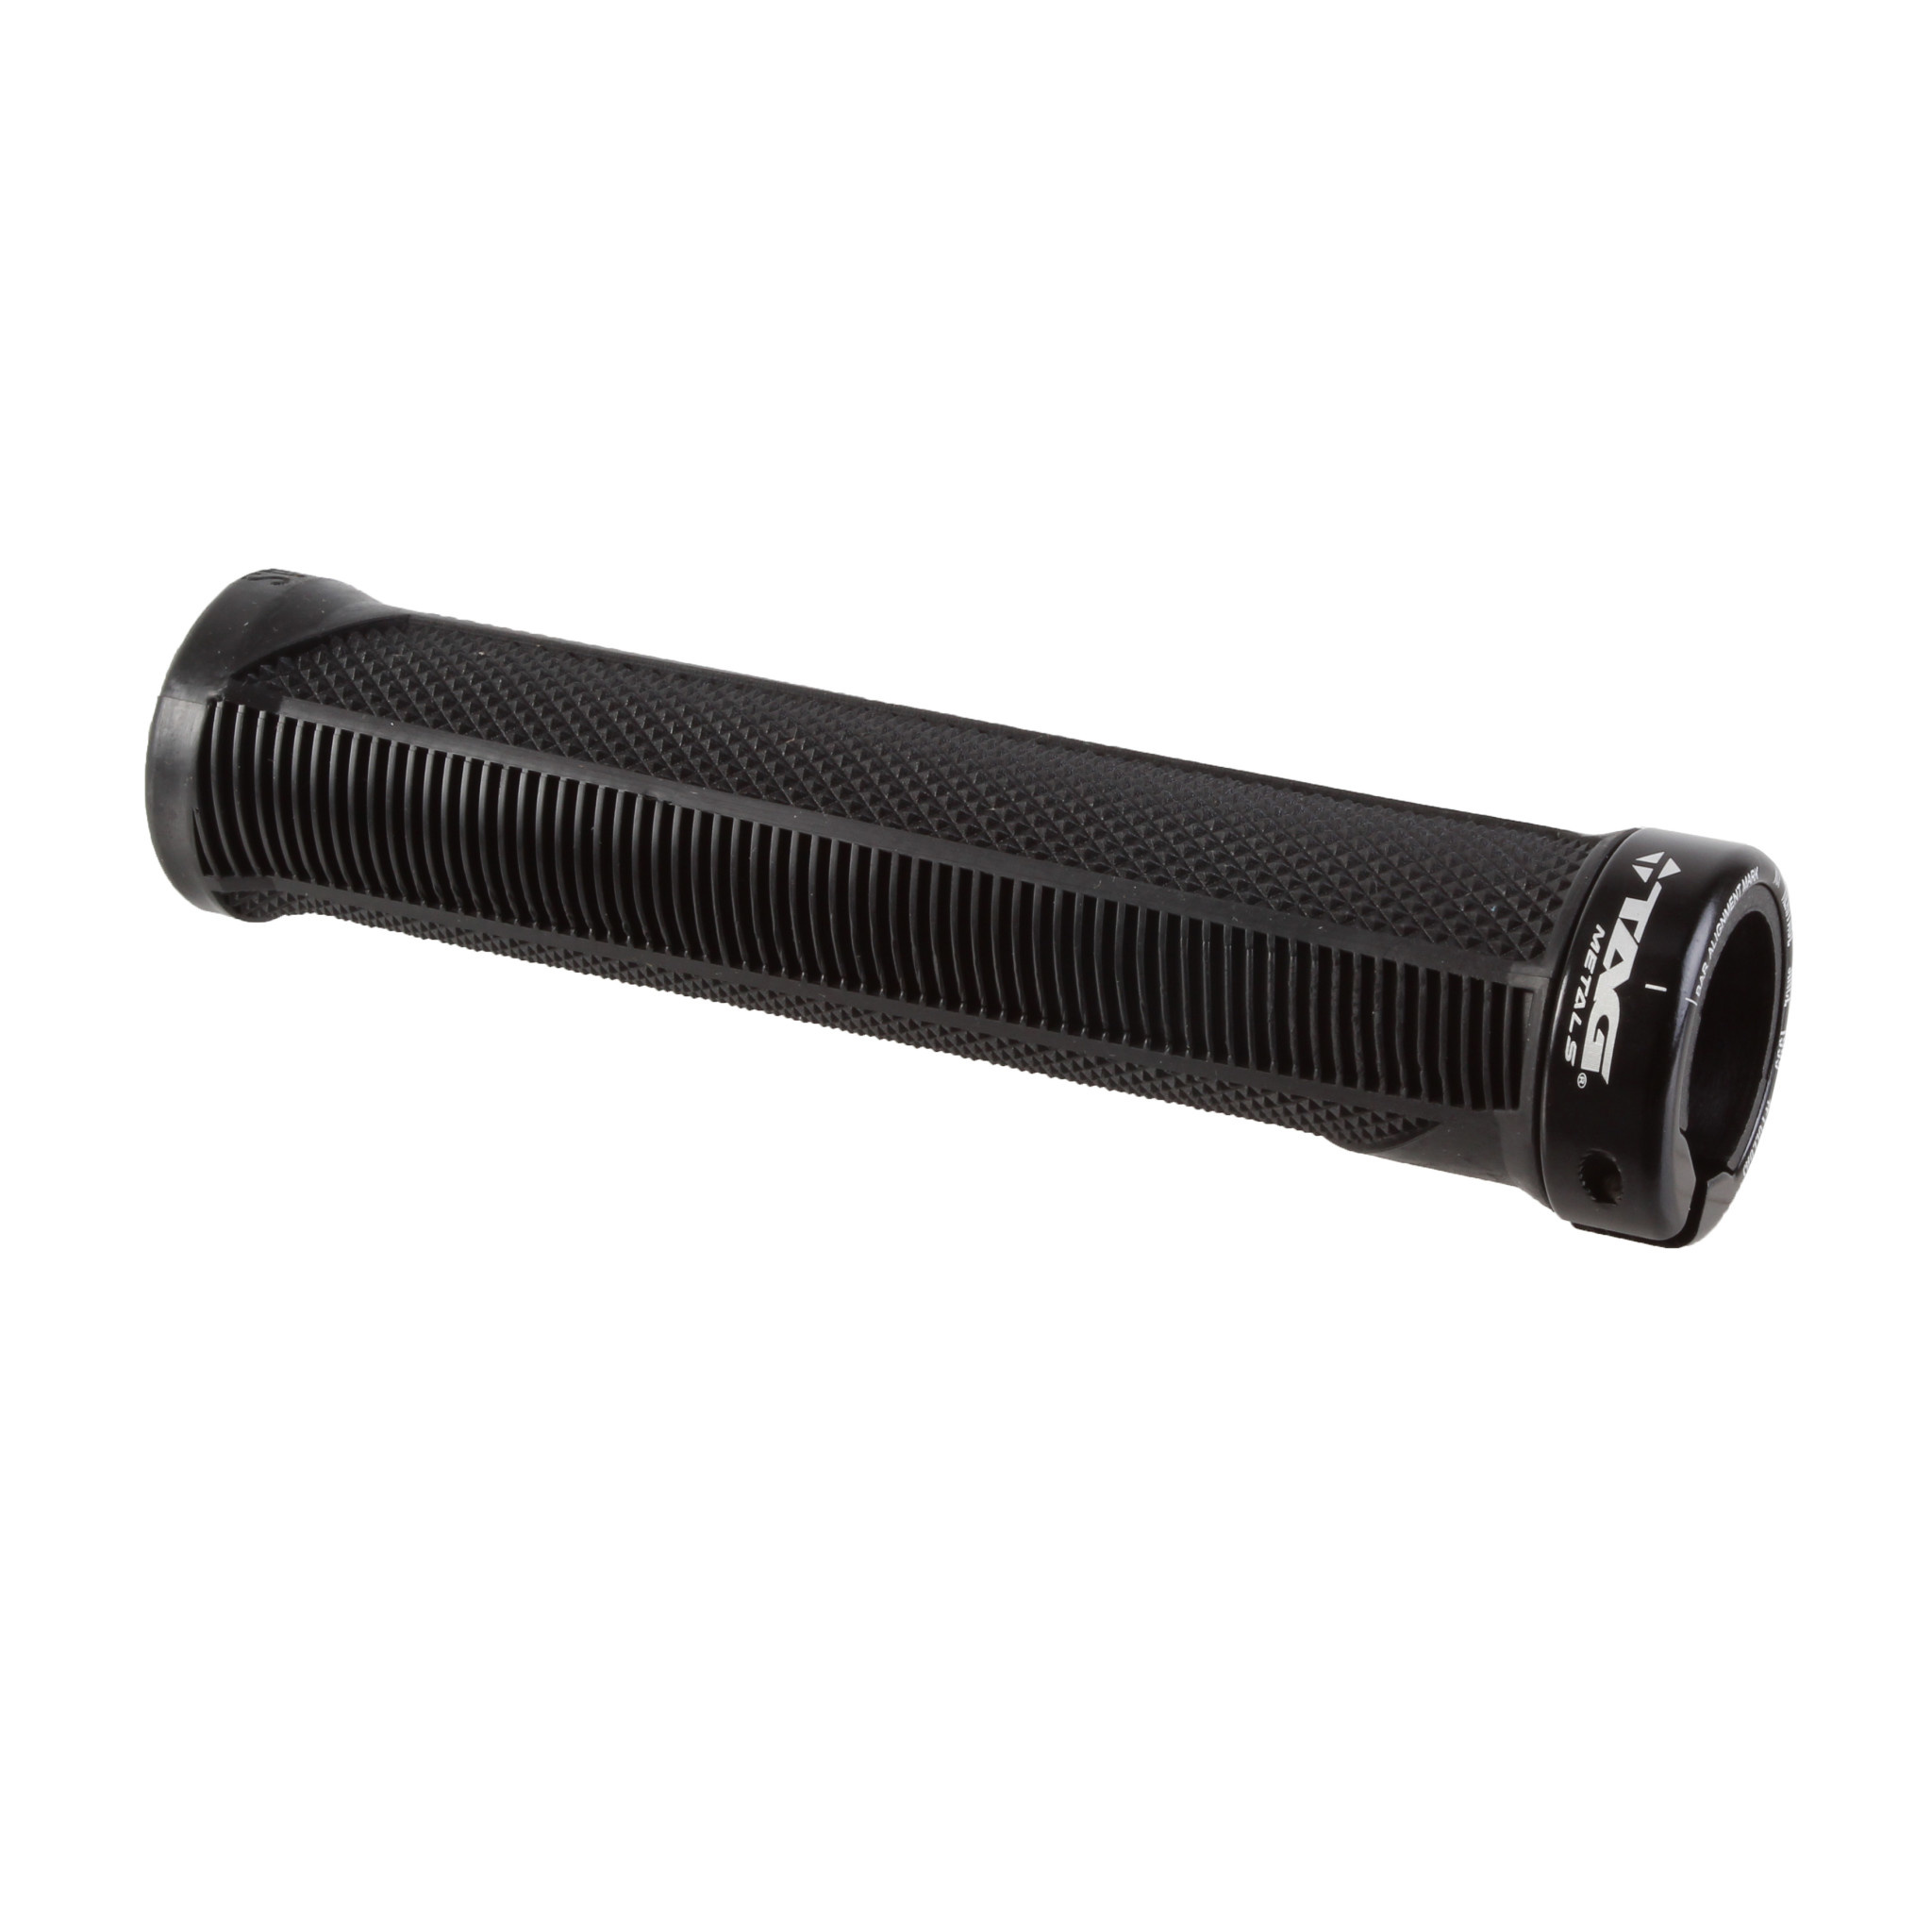 Tag Metals T1 Section Grips, Black